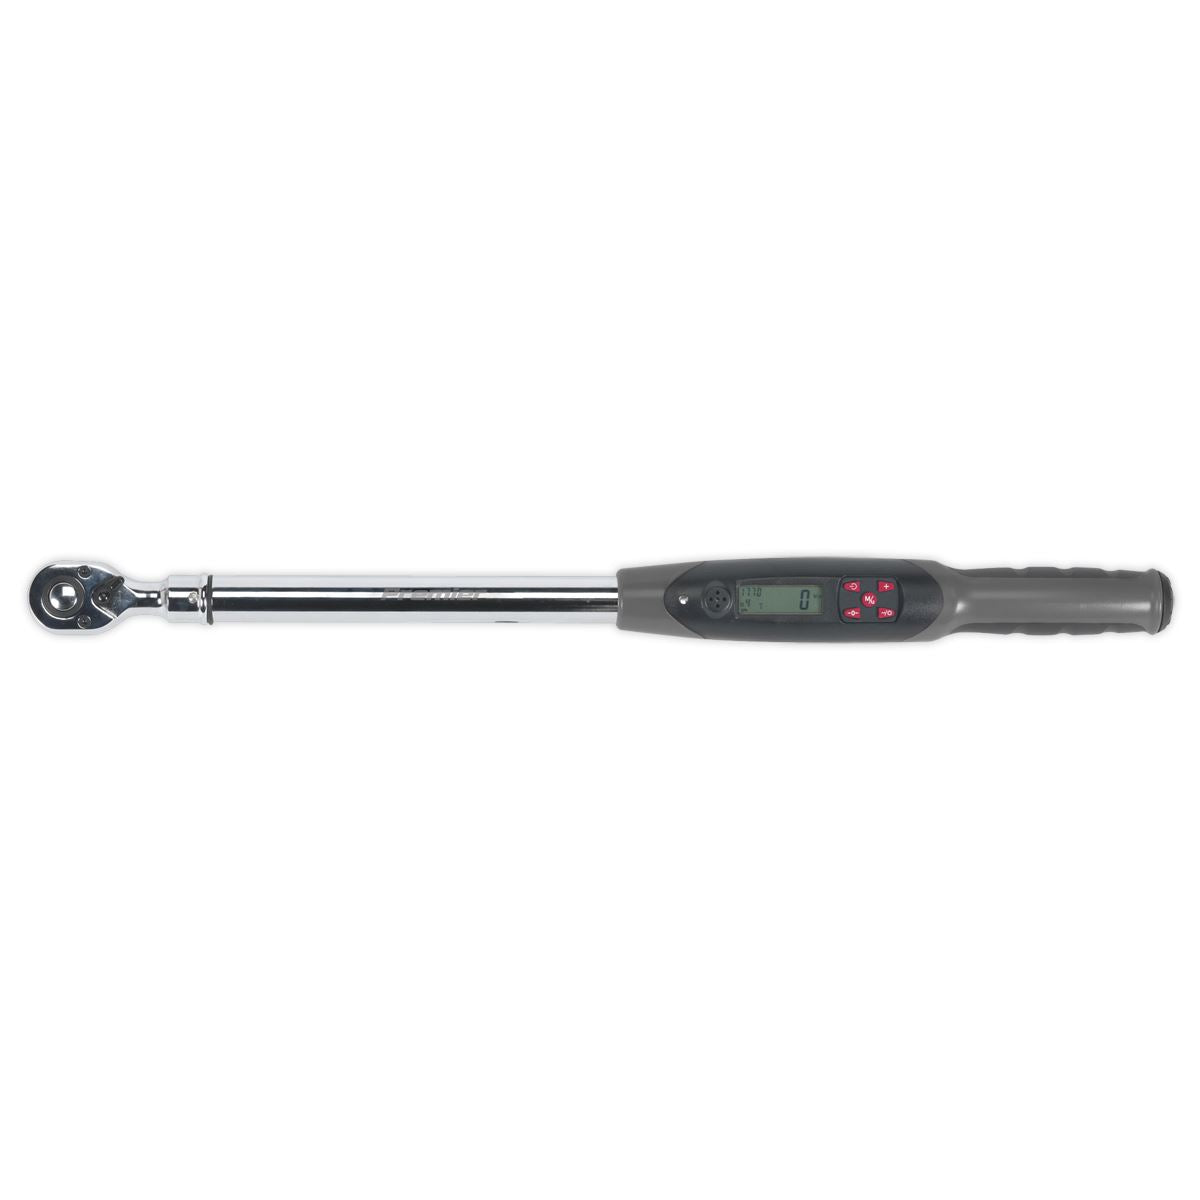 Sealey Premier Angle Torque Wrench Digital 1/2"Sq Drive 20-200Nm(14.7-147.5lb.ft)